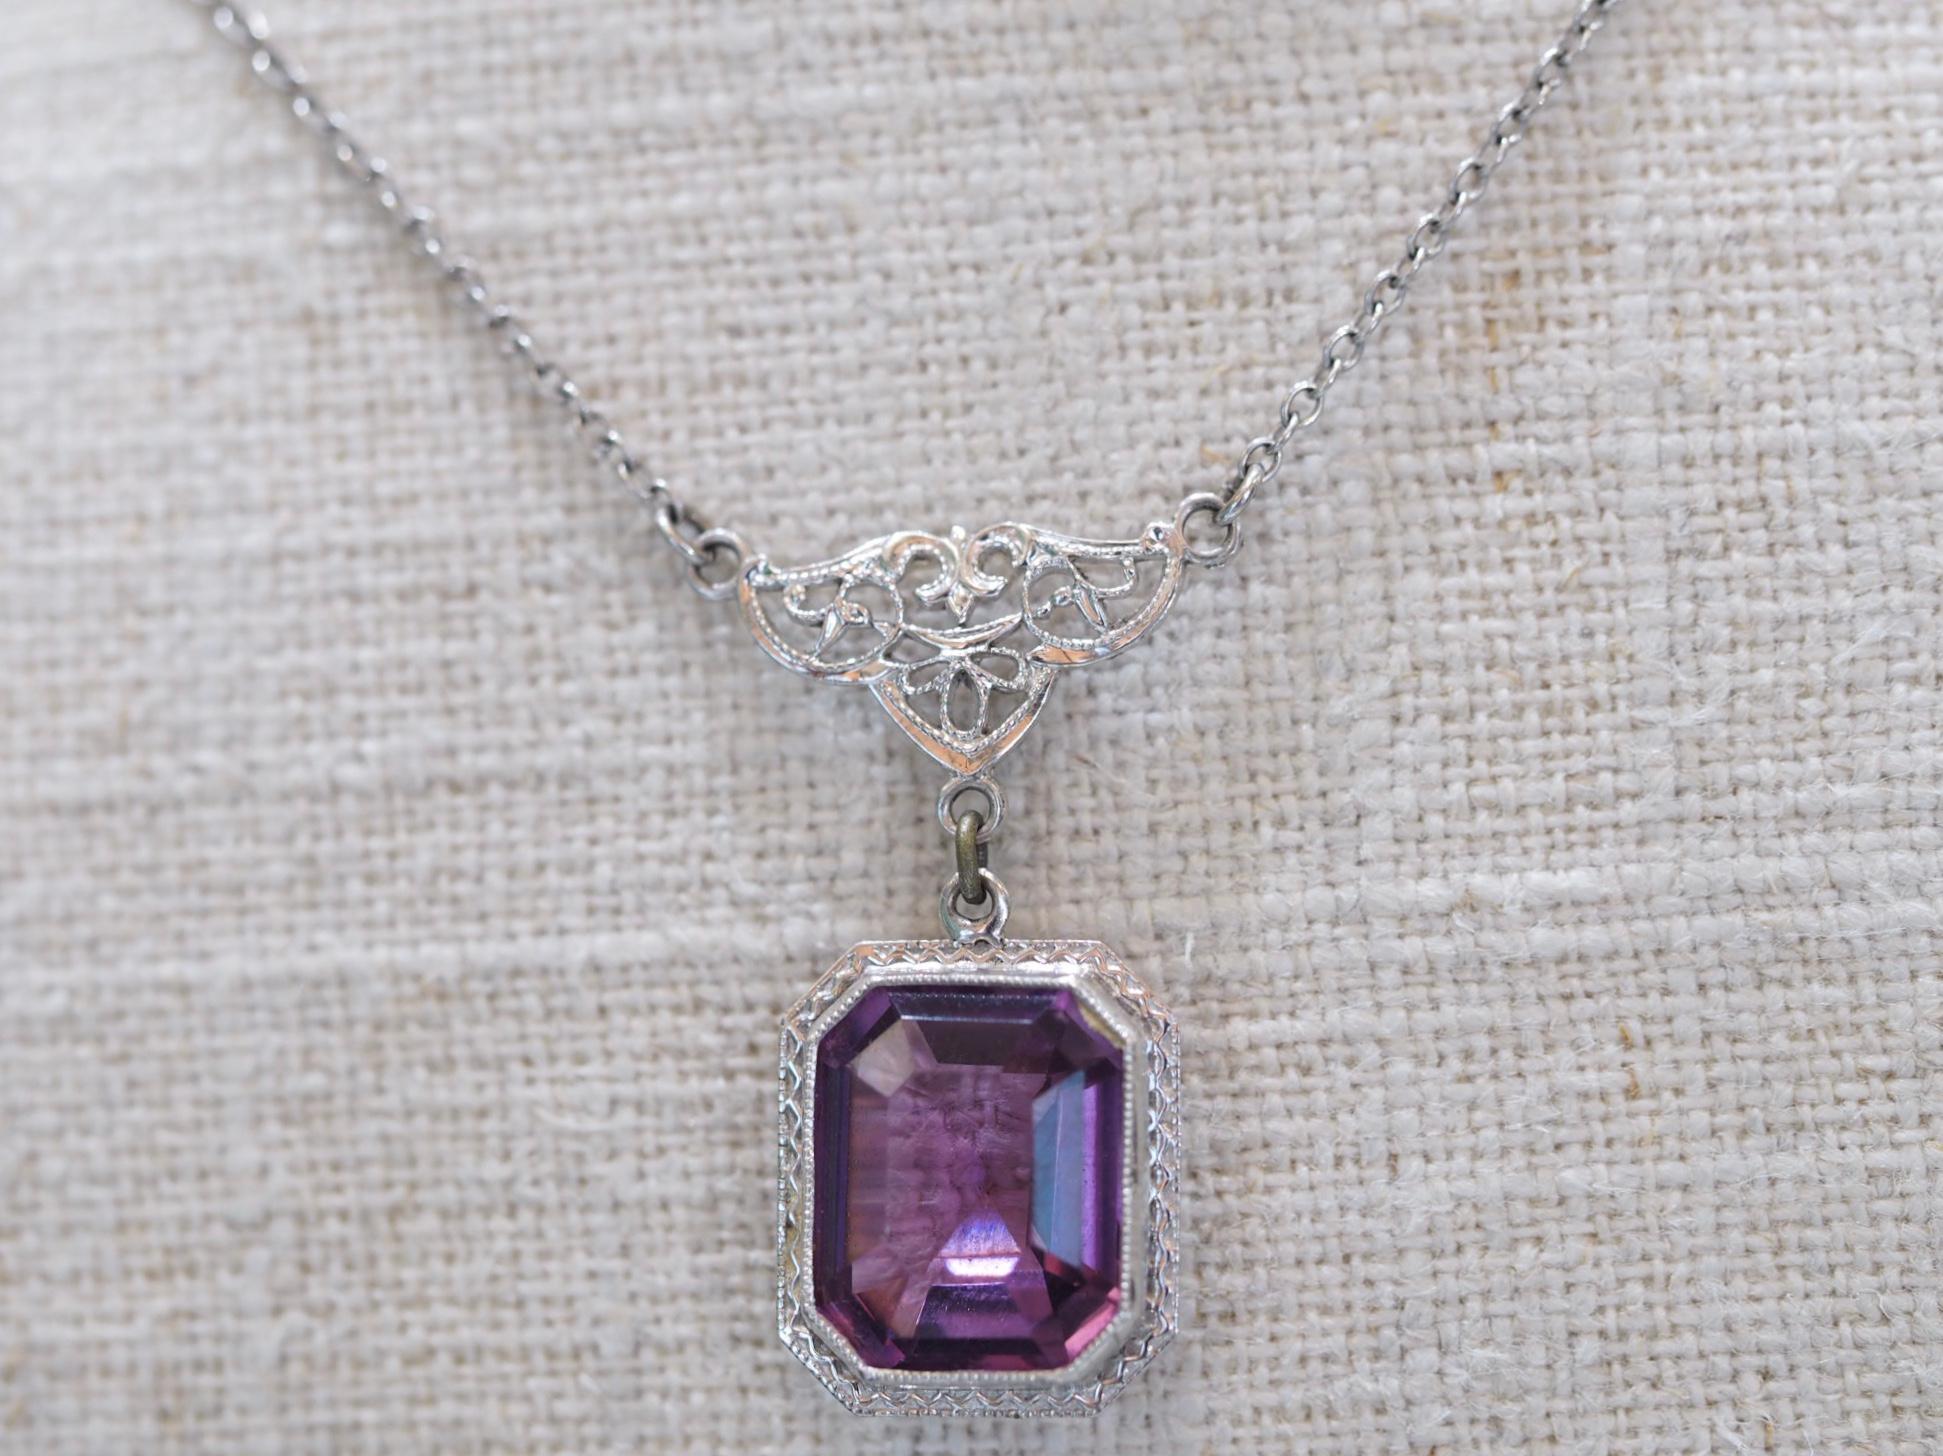 Vintage Art Deco 1930's Amethyst Necklace includes a beautiful brilliant purple amethyst center. The center measures 11.50 X 9.50mm weighing approximately weighing 4.31 carats. The amethyst is bezel set with filigree hanging from a bail with